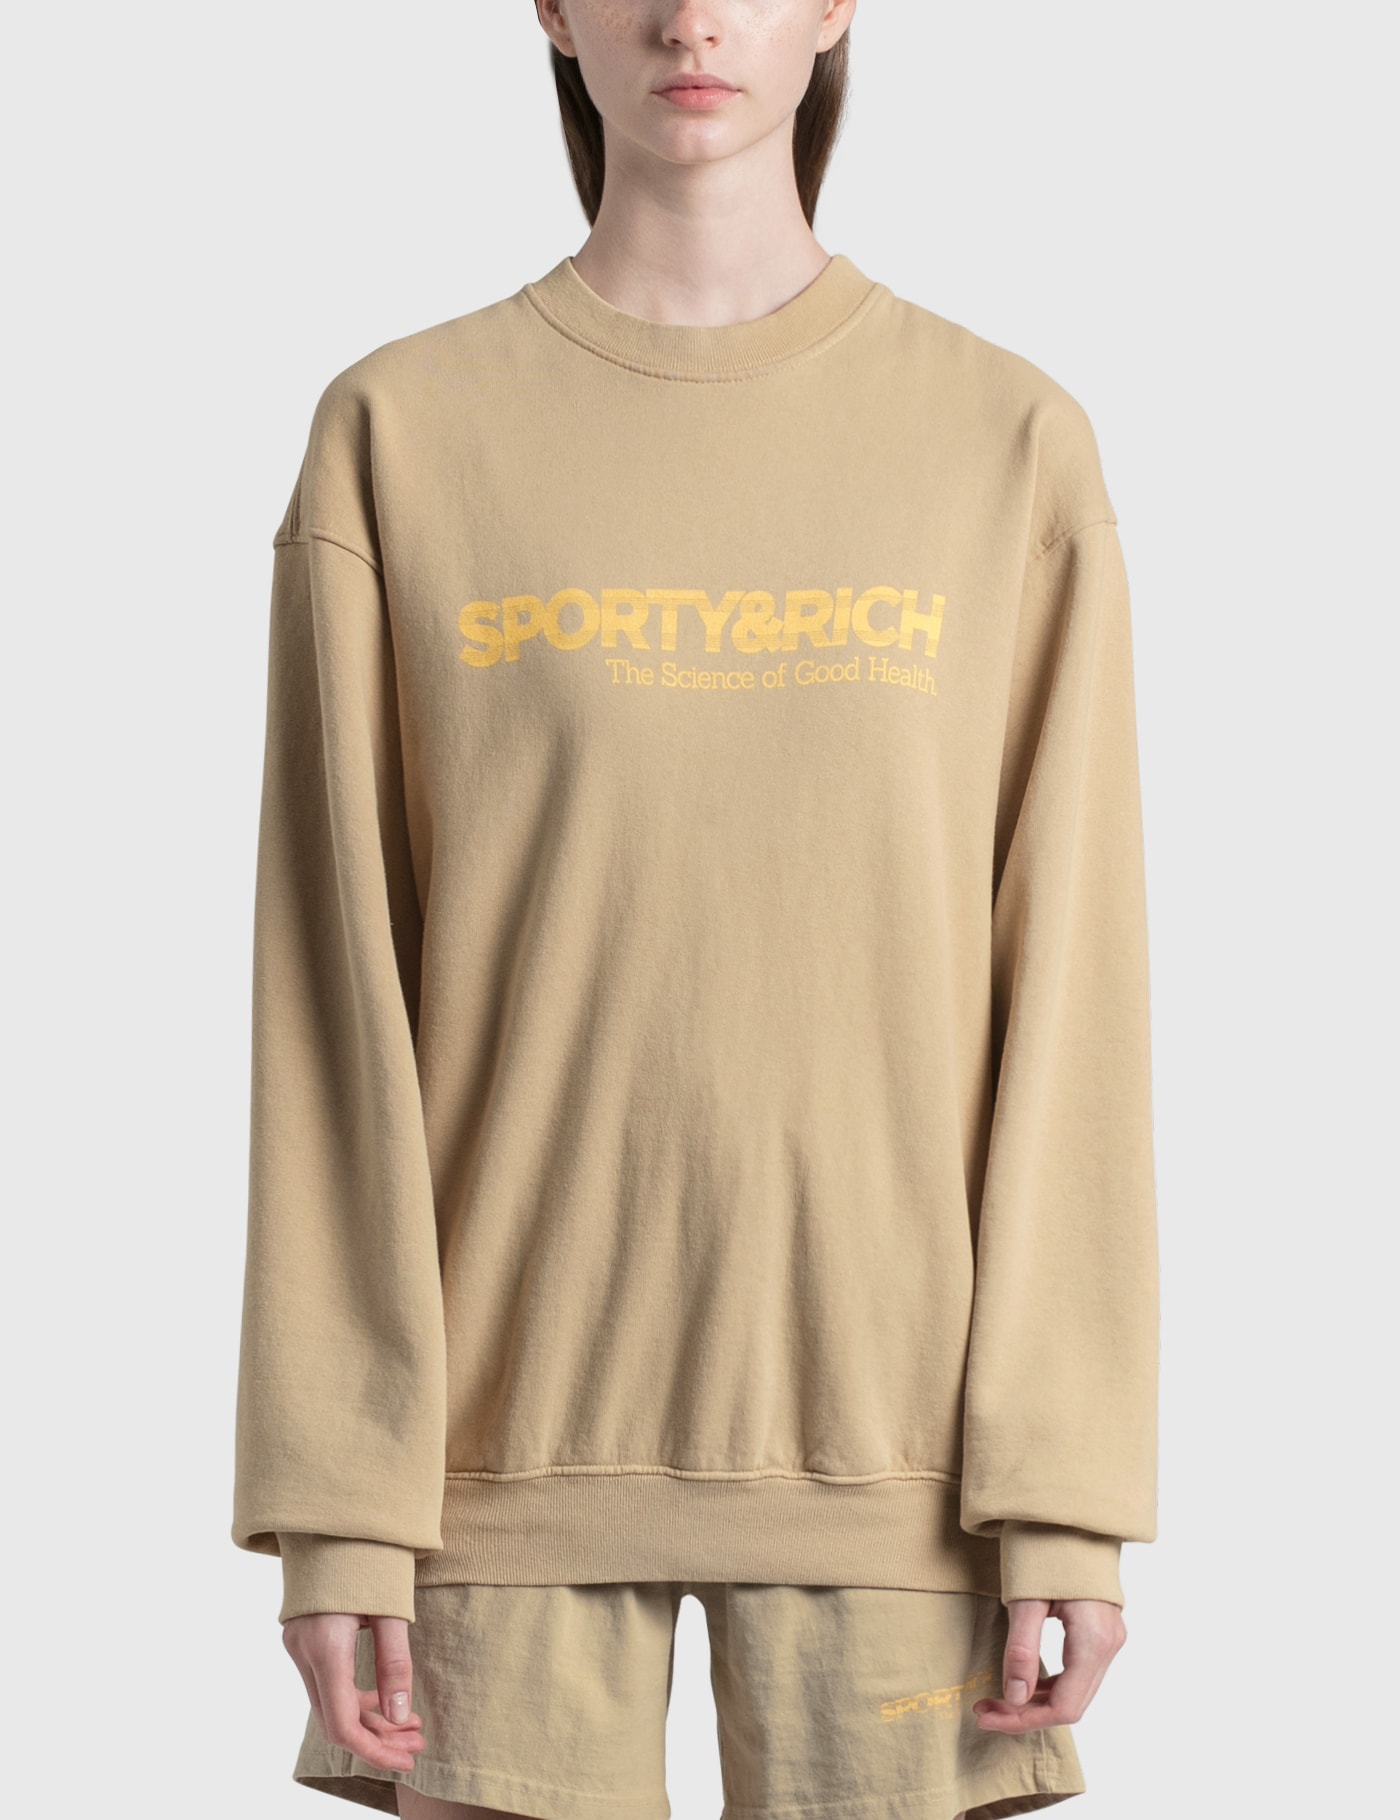 SPORTY AND RICH SCIENCE CREWNECK